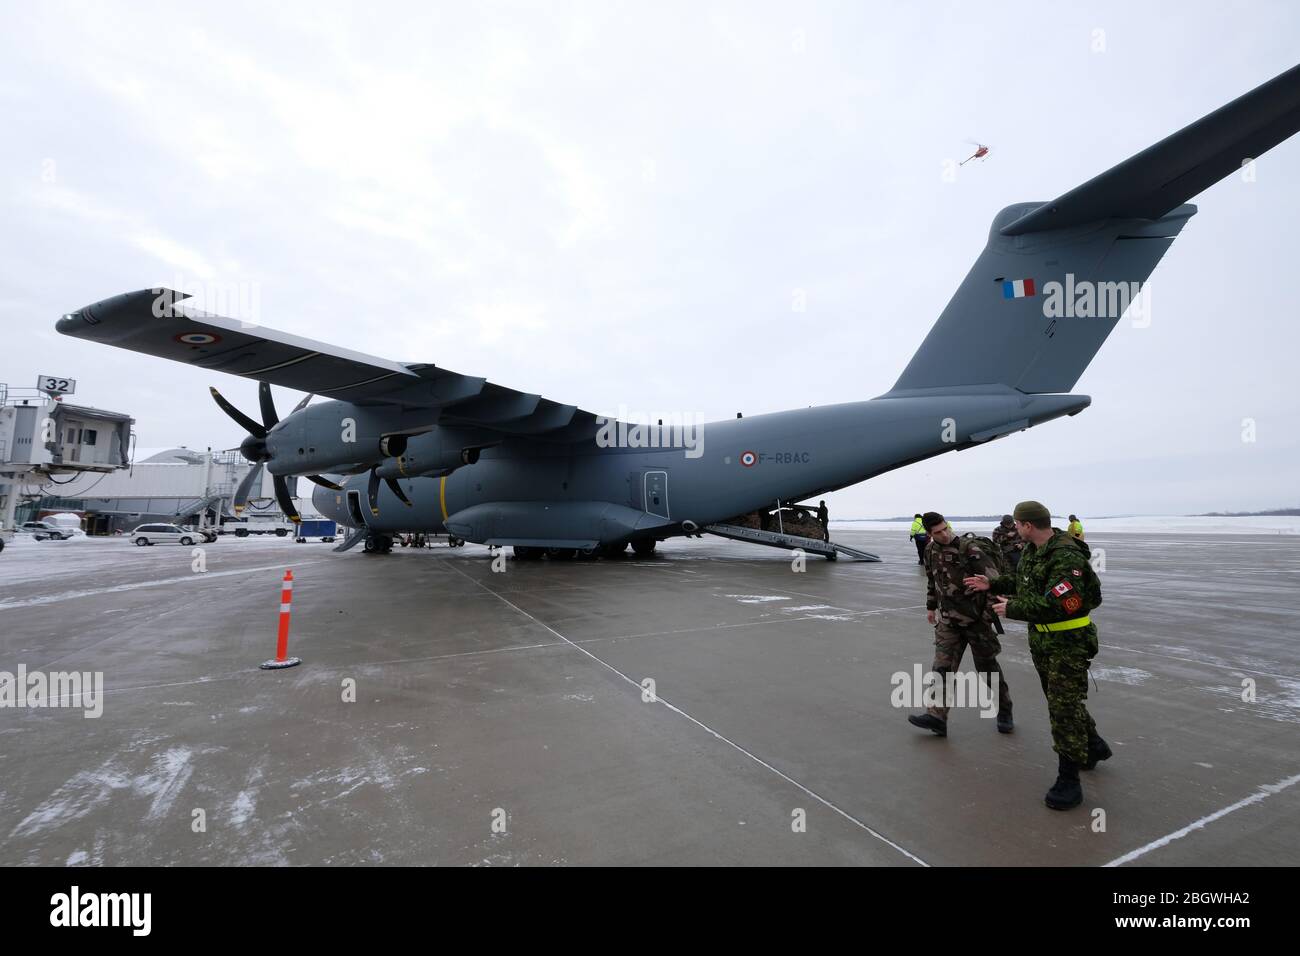 SAGUENAY, CANADA - JANUARY 10: The A400M aircraft is coming on the tarmac of the airport, Quebec, Quebec city, Canada on January 10, 2017 in Saguenay, Stock Photo